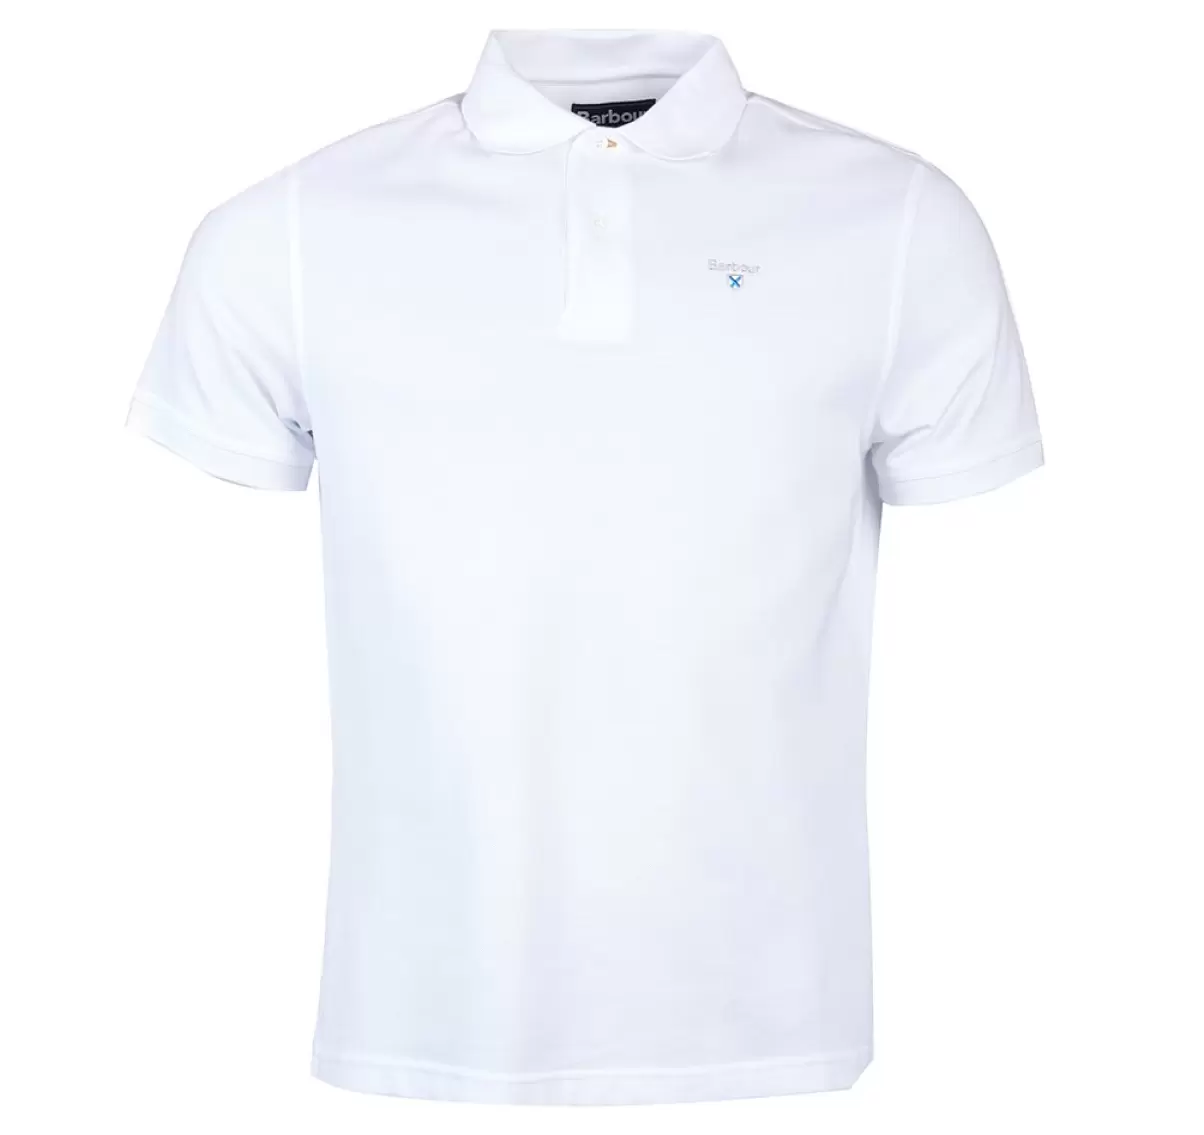 Grey Marl Efficient Polo Shirts Barbour Sports Polo Shirt Men - 7